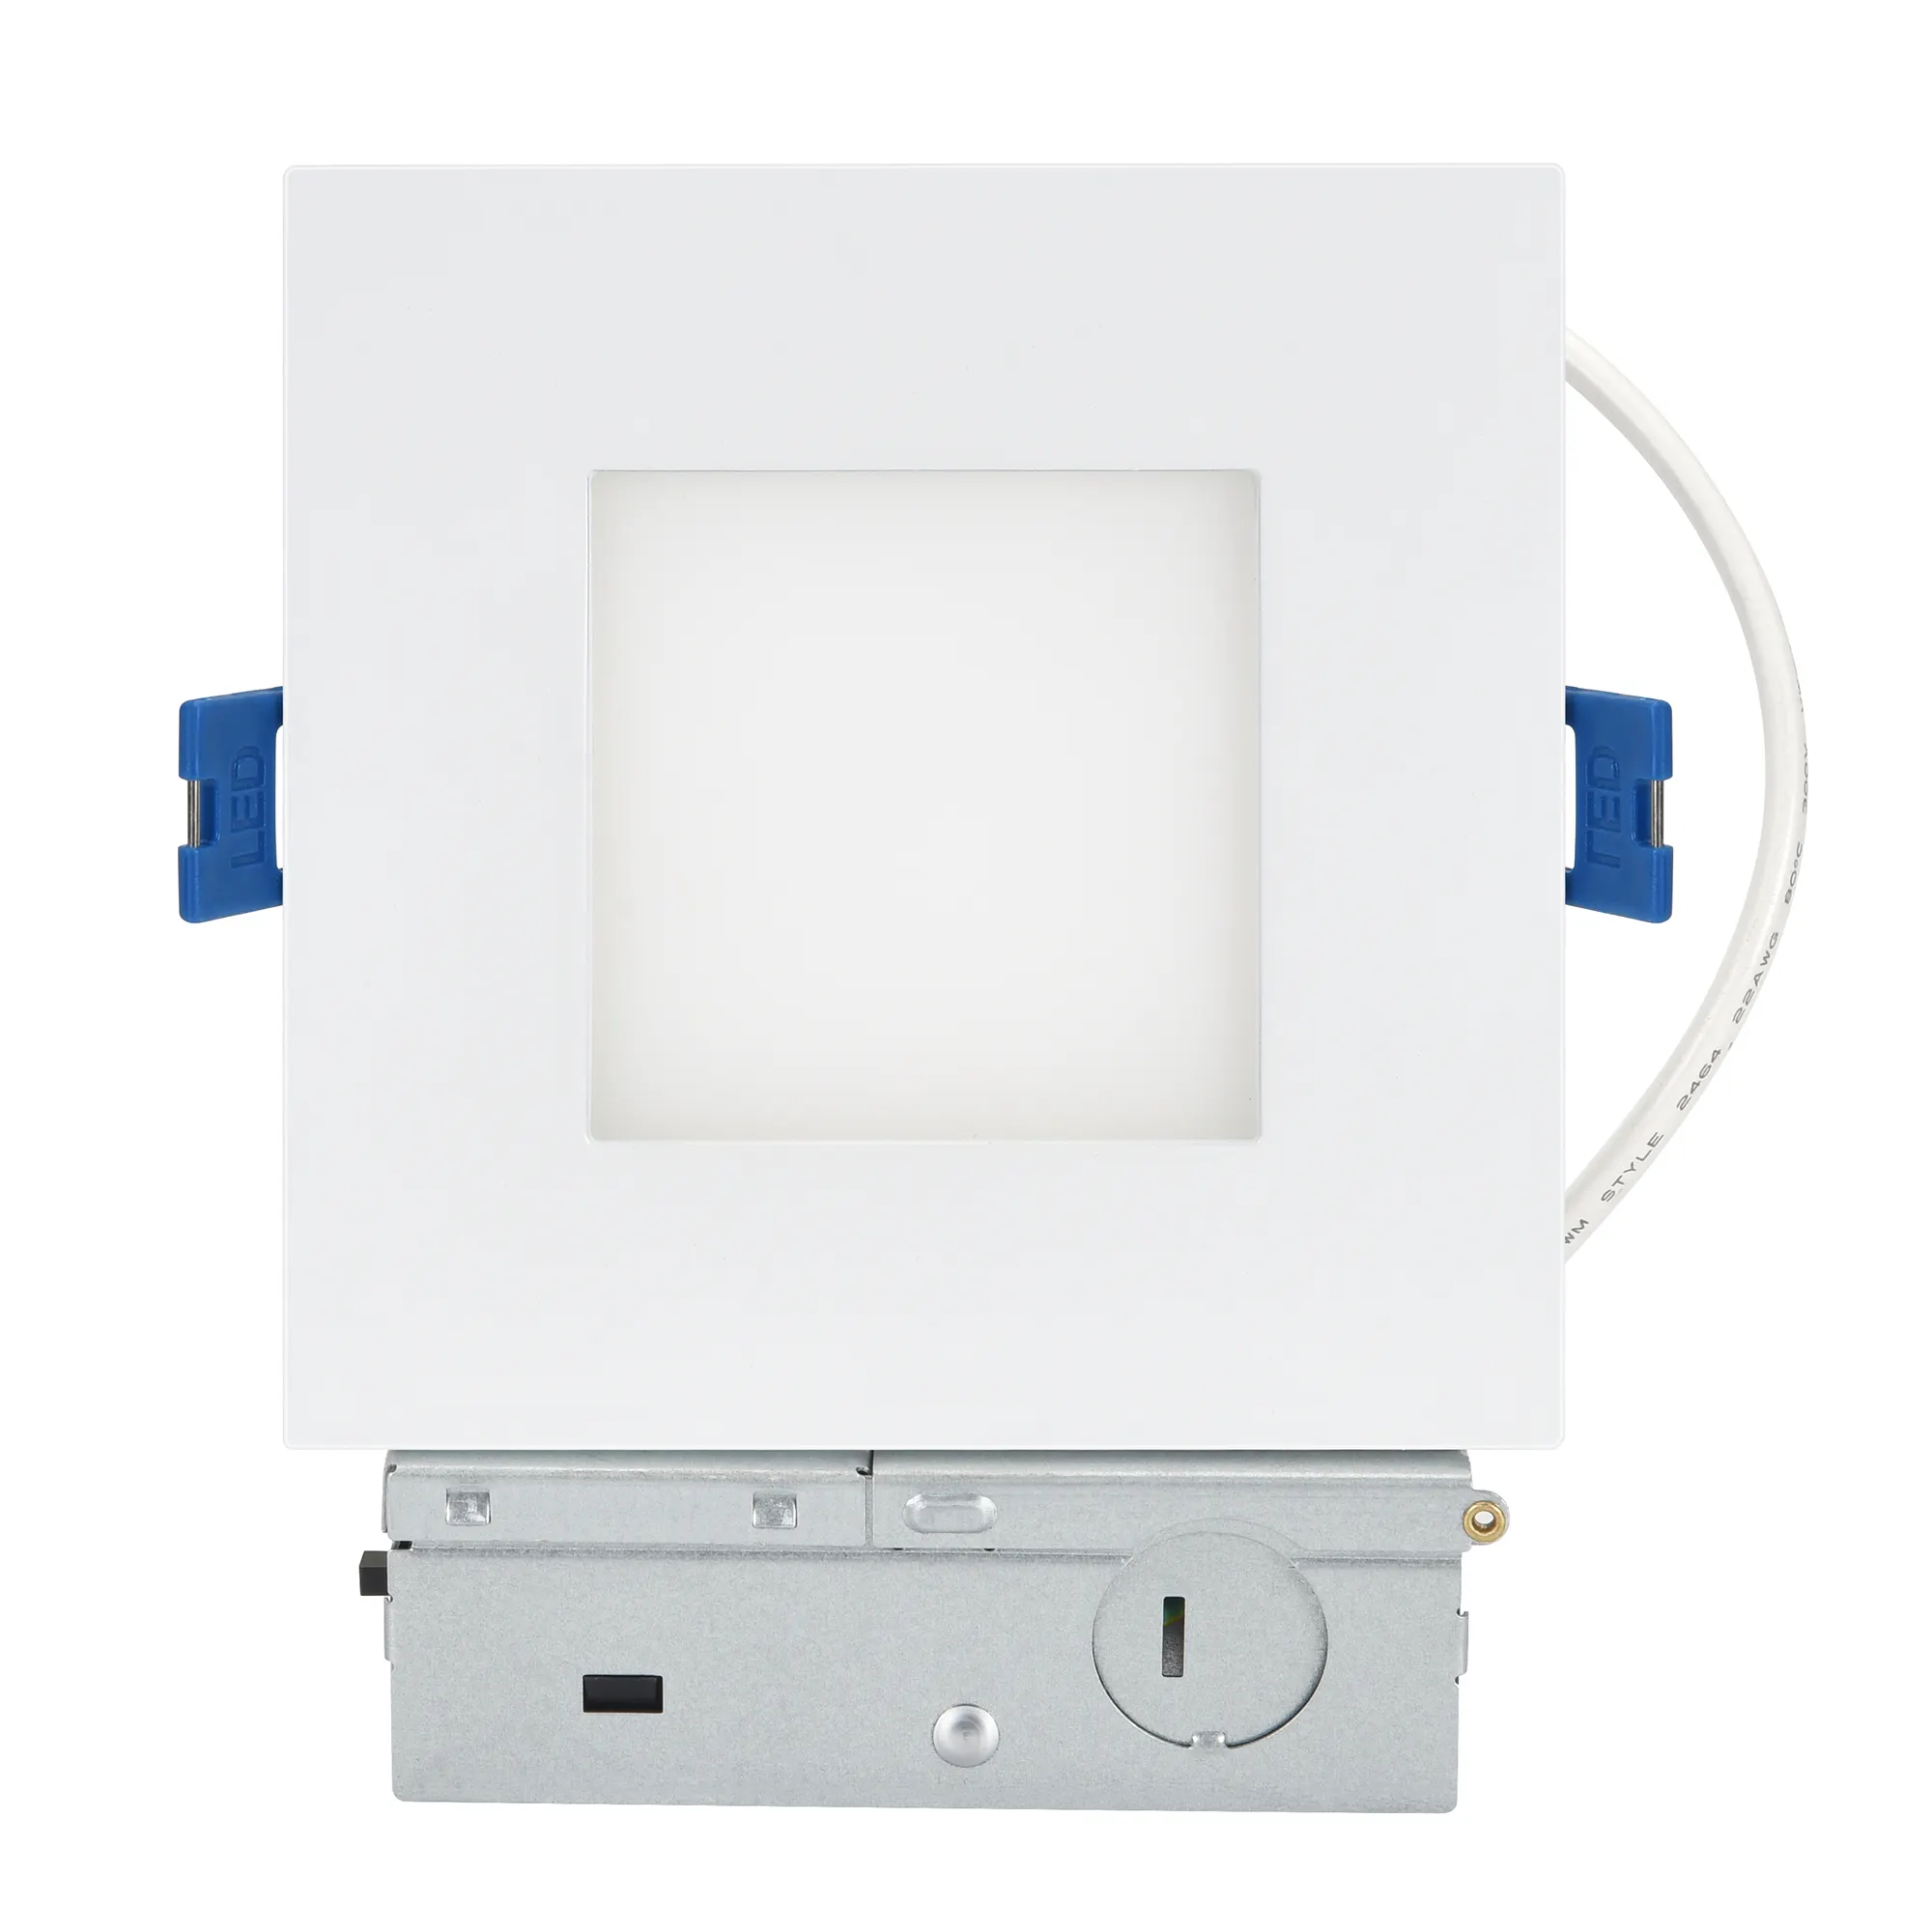 Indoor 5cct dimmable Square Flat 4 Inch etl wet recessed slim downlight with junction box